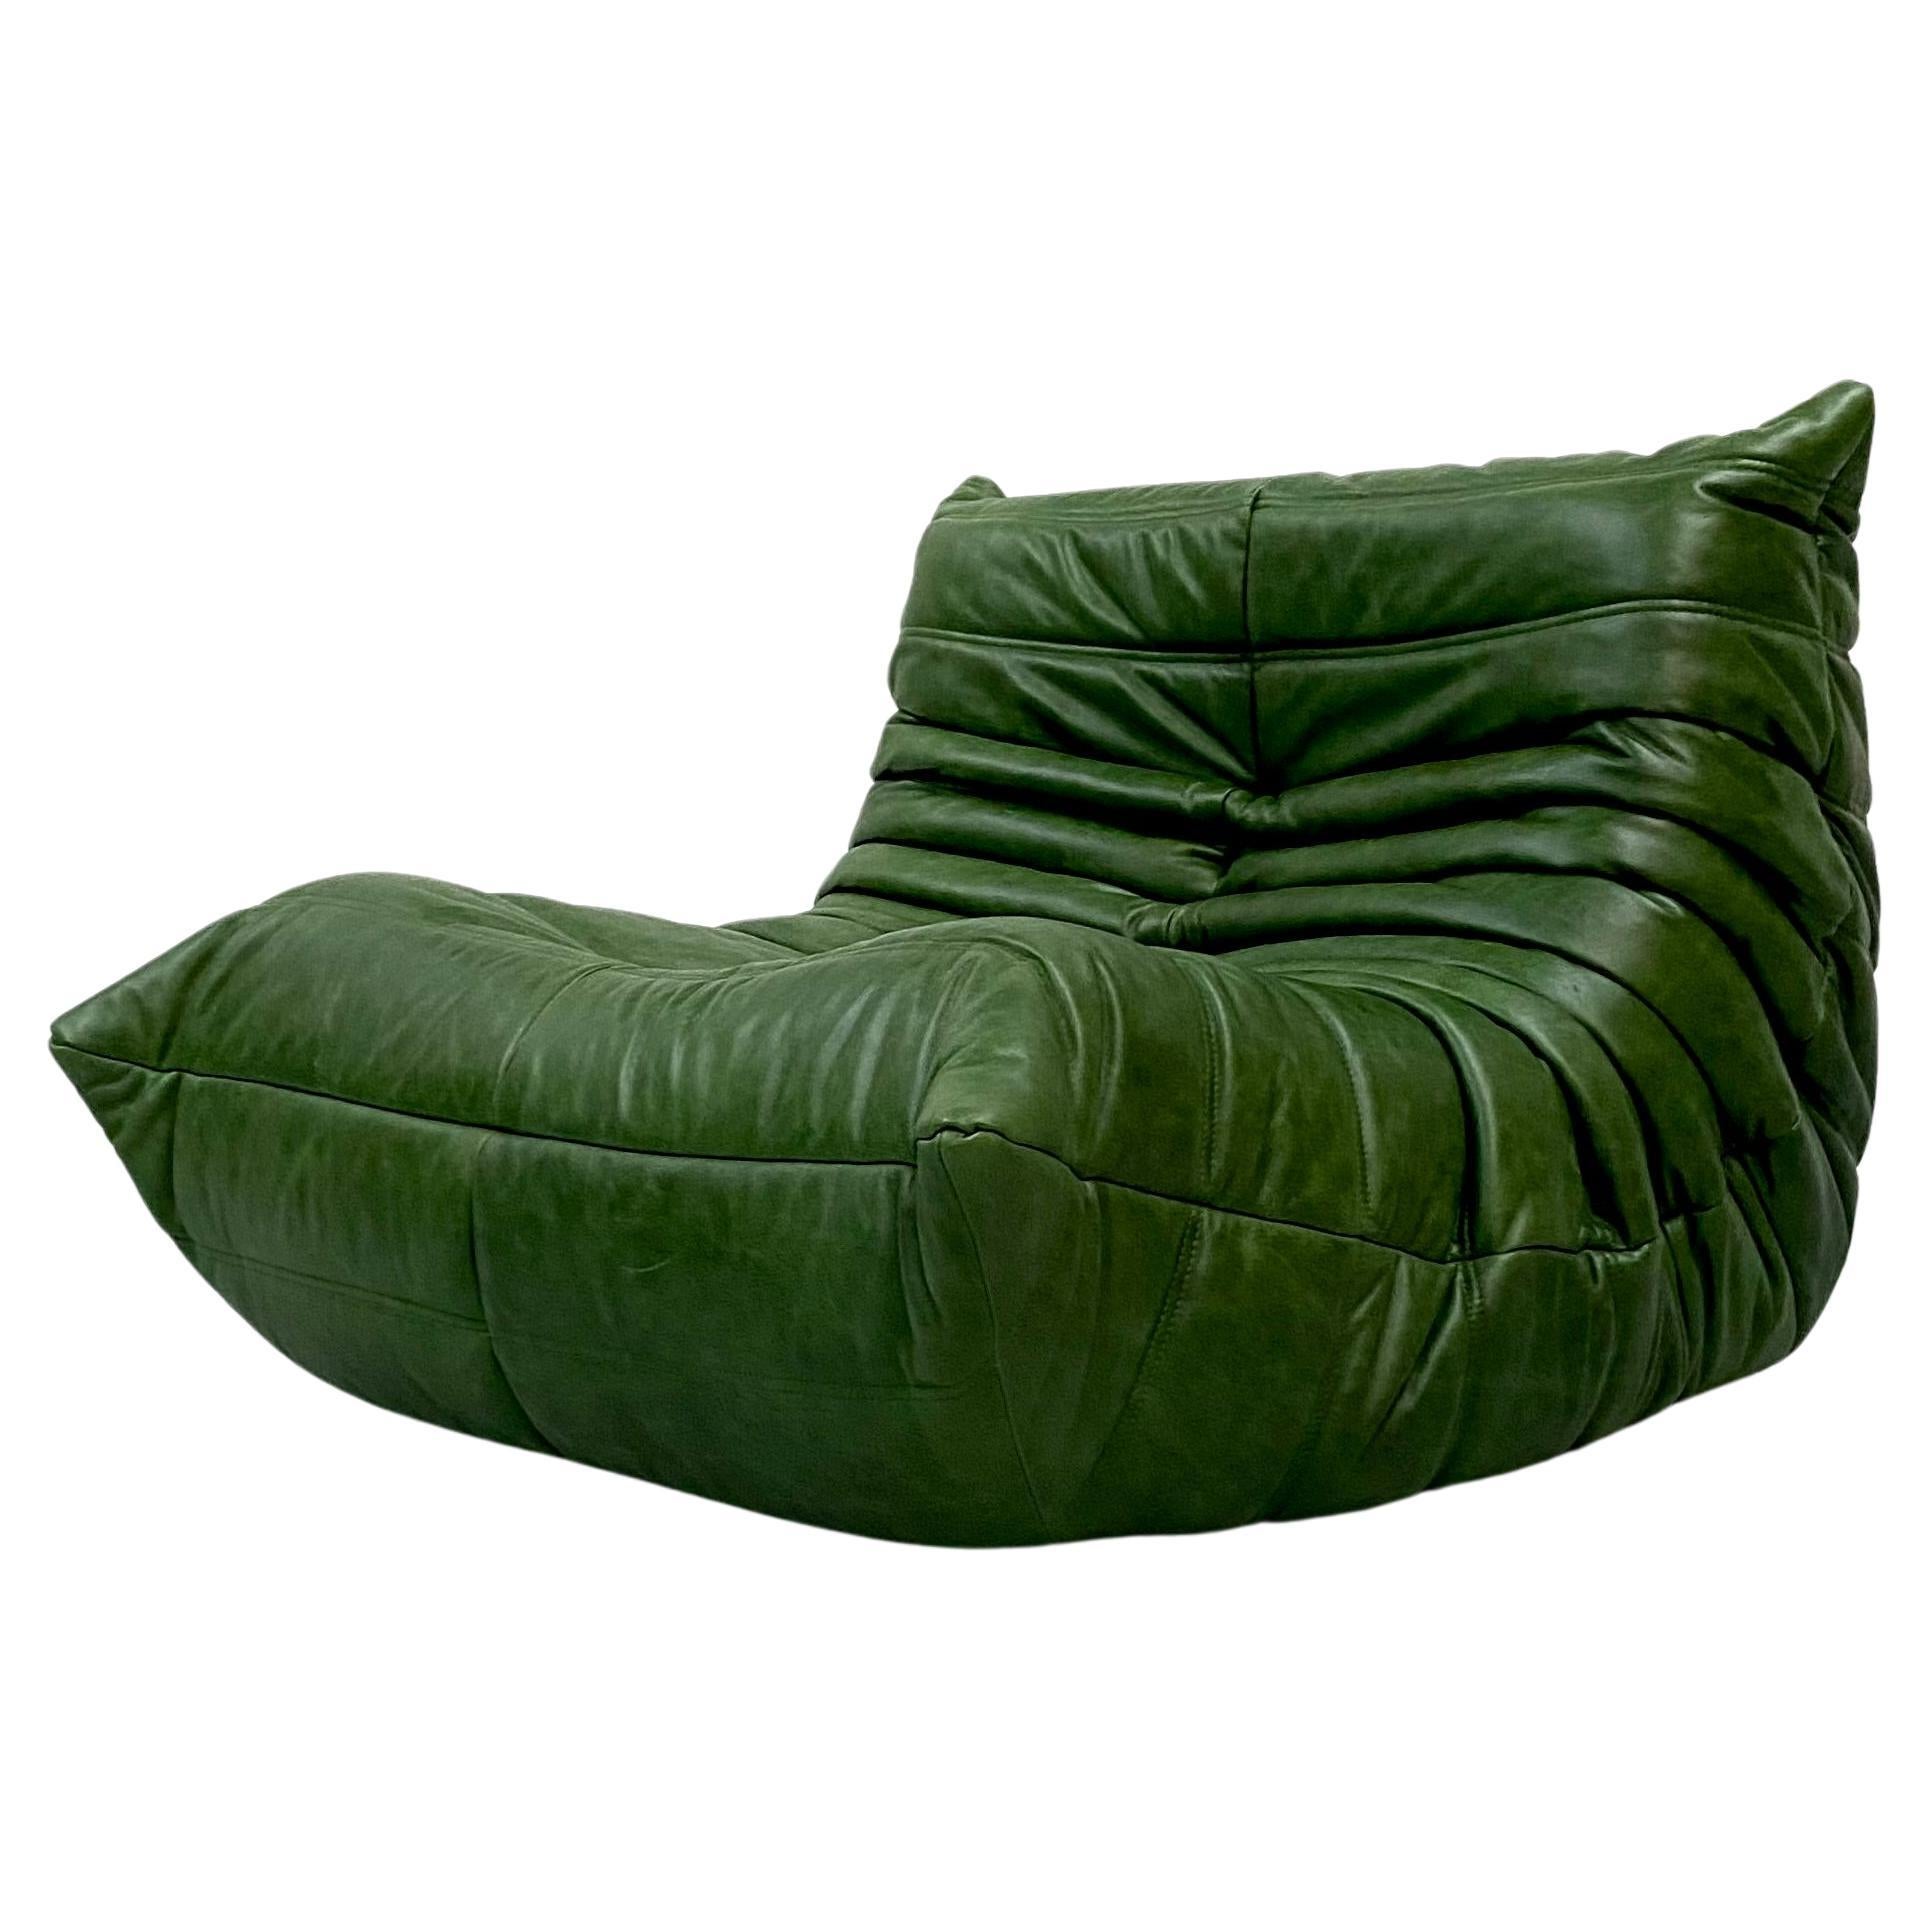 French Vintage Togo Chair in Green Leather by Michel Ducaroy for Ligne Roset.